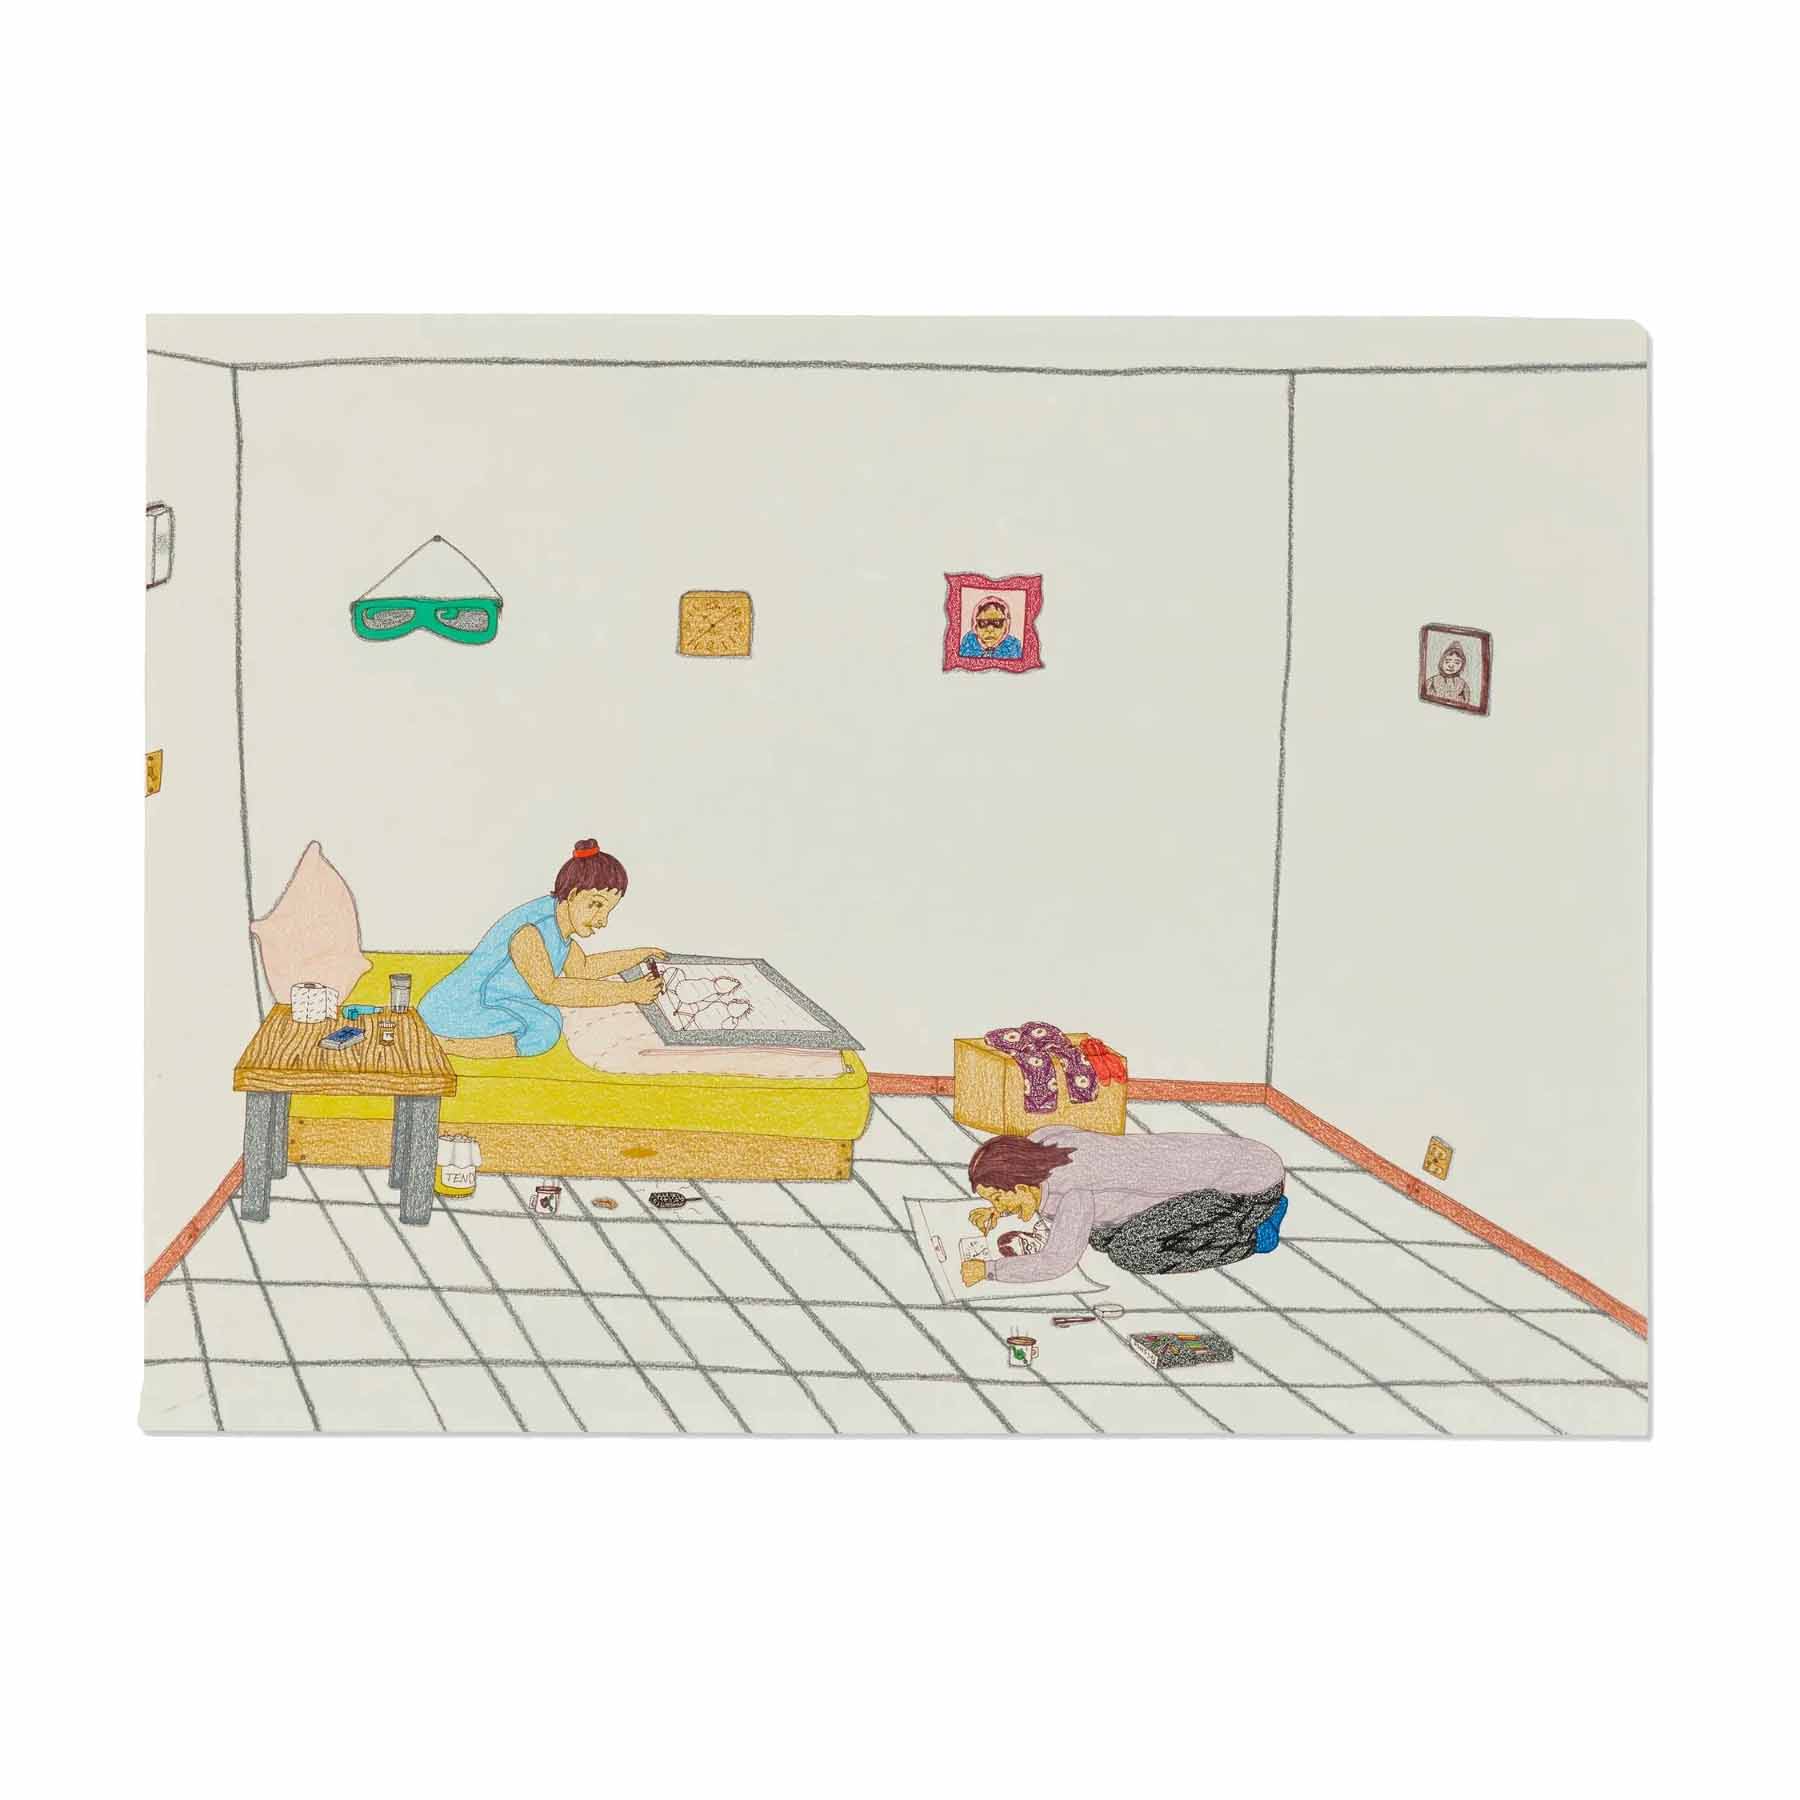 First Nations artist Annie Pootoogook&#8217;s illustrations skyrocketed at LAMA